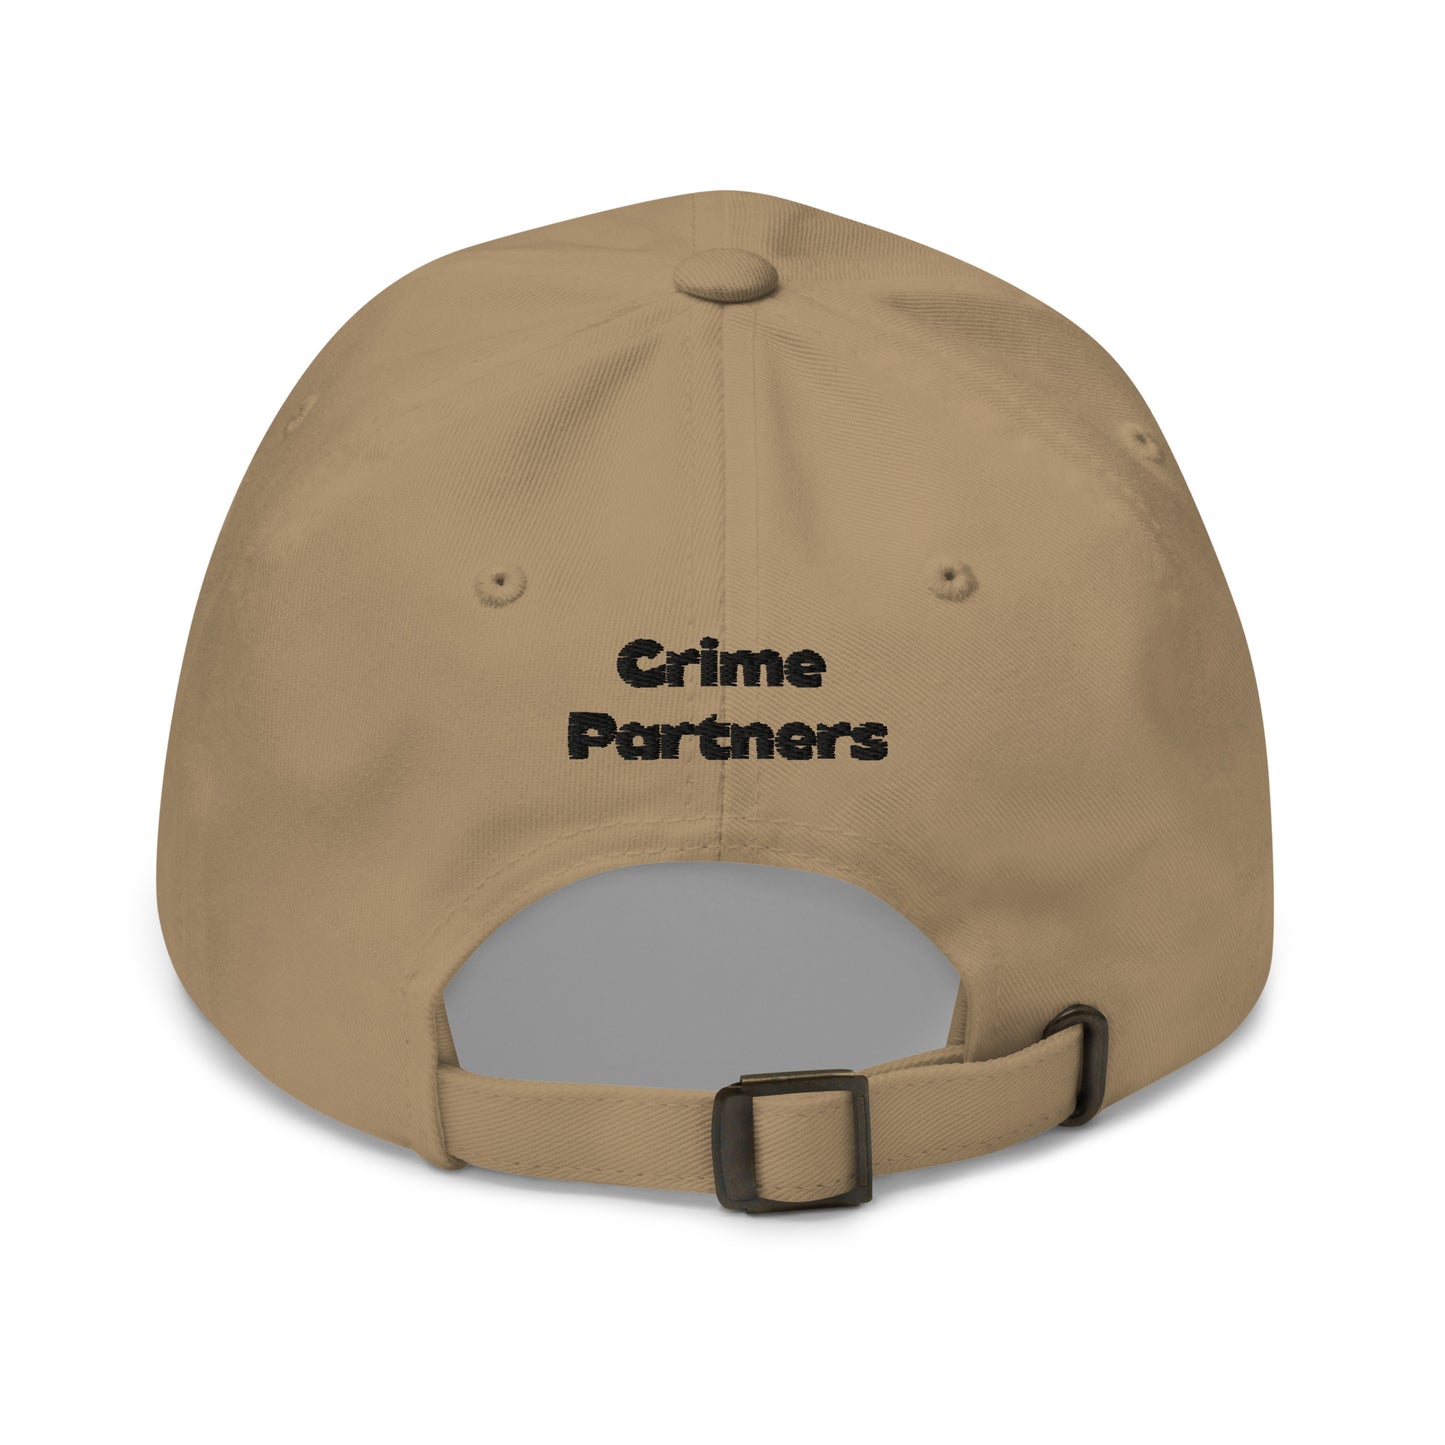 love - Partners in Crime - Dad hat